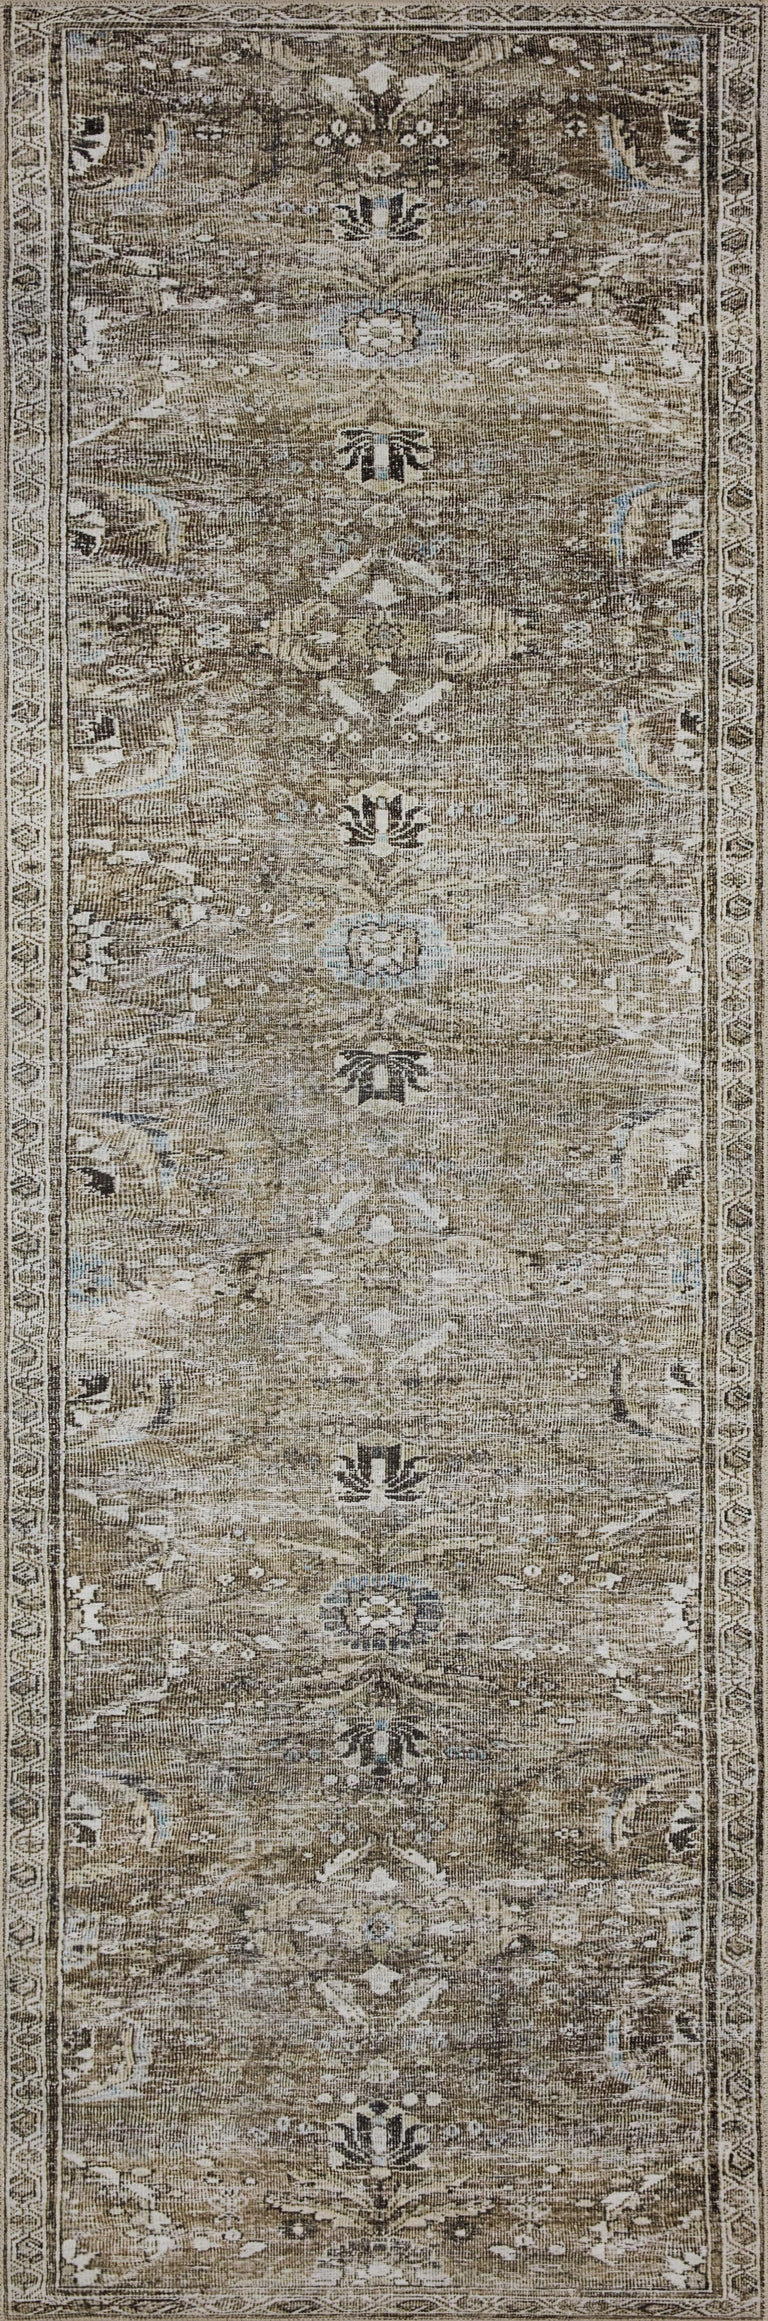 Loloi II Layla Collection Rug in Antique, Moss - 2'3" x 3'9"